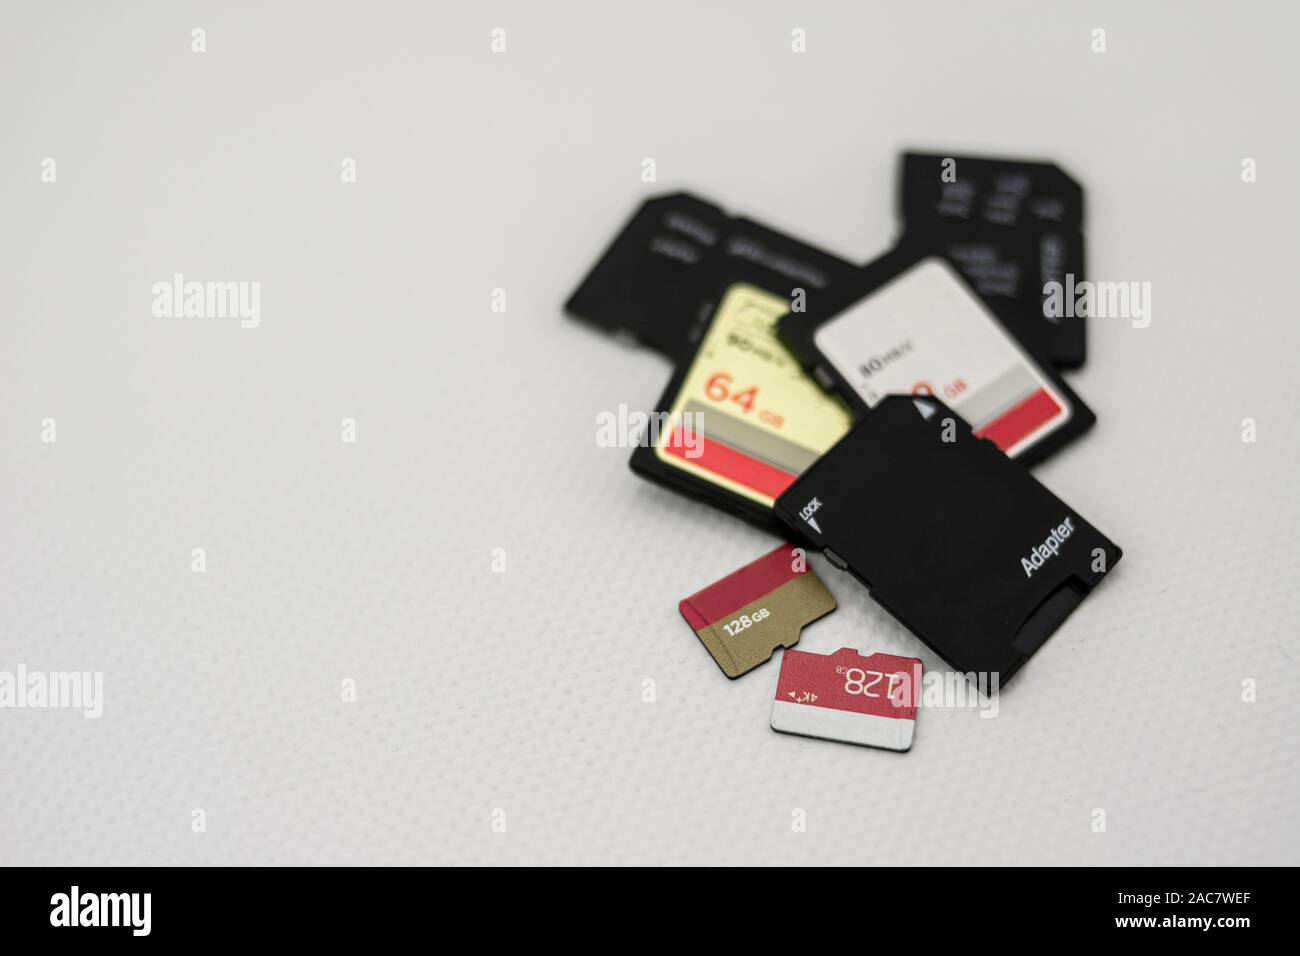 Set of sd and micro sd memories with adapters for information and data storage Stock Photo